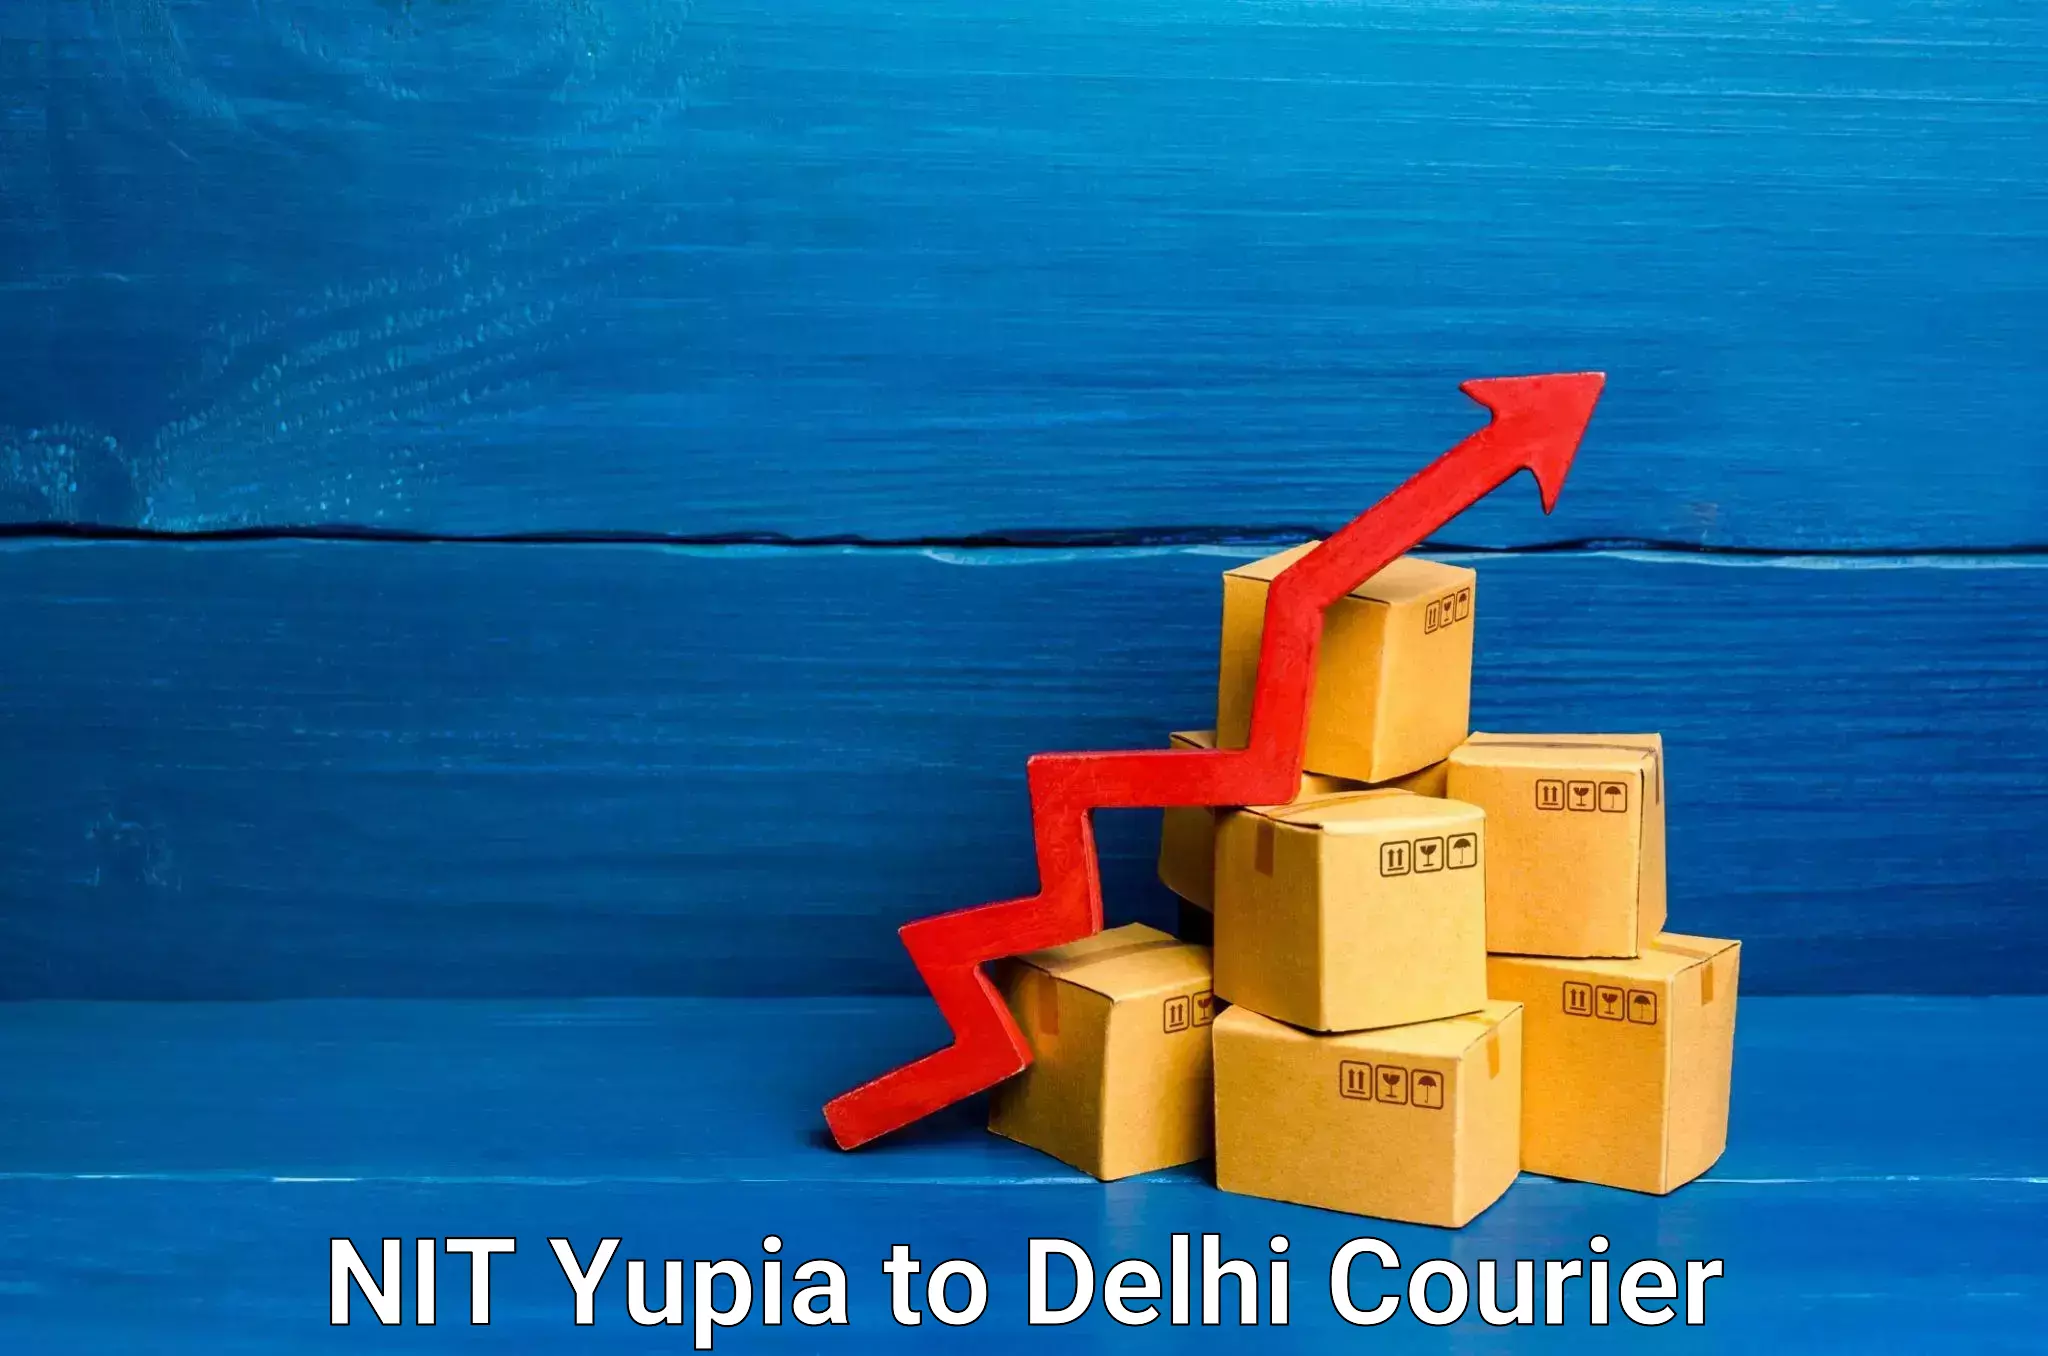 Reliable courier service NIT Yupia to Lodhi Road